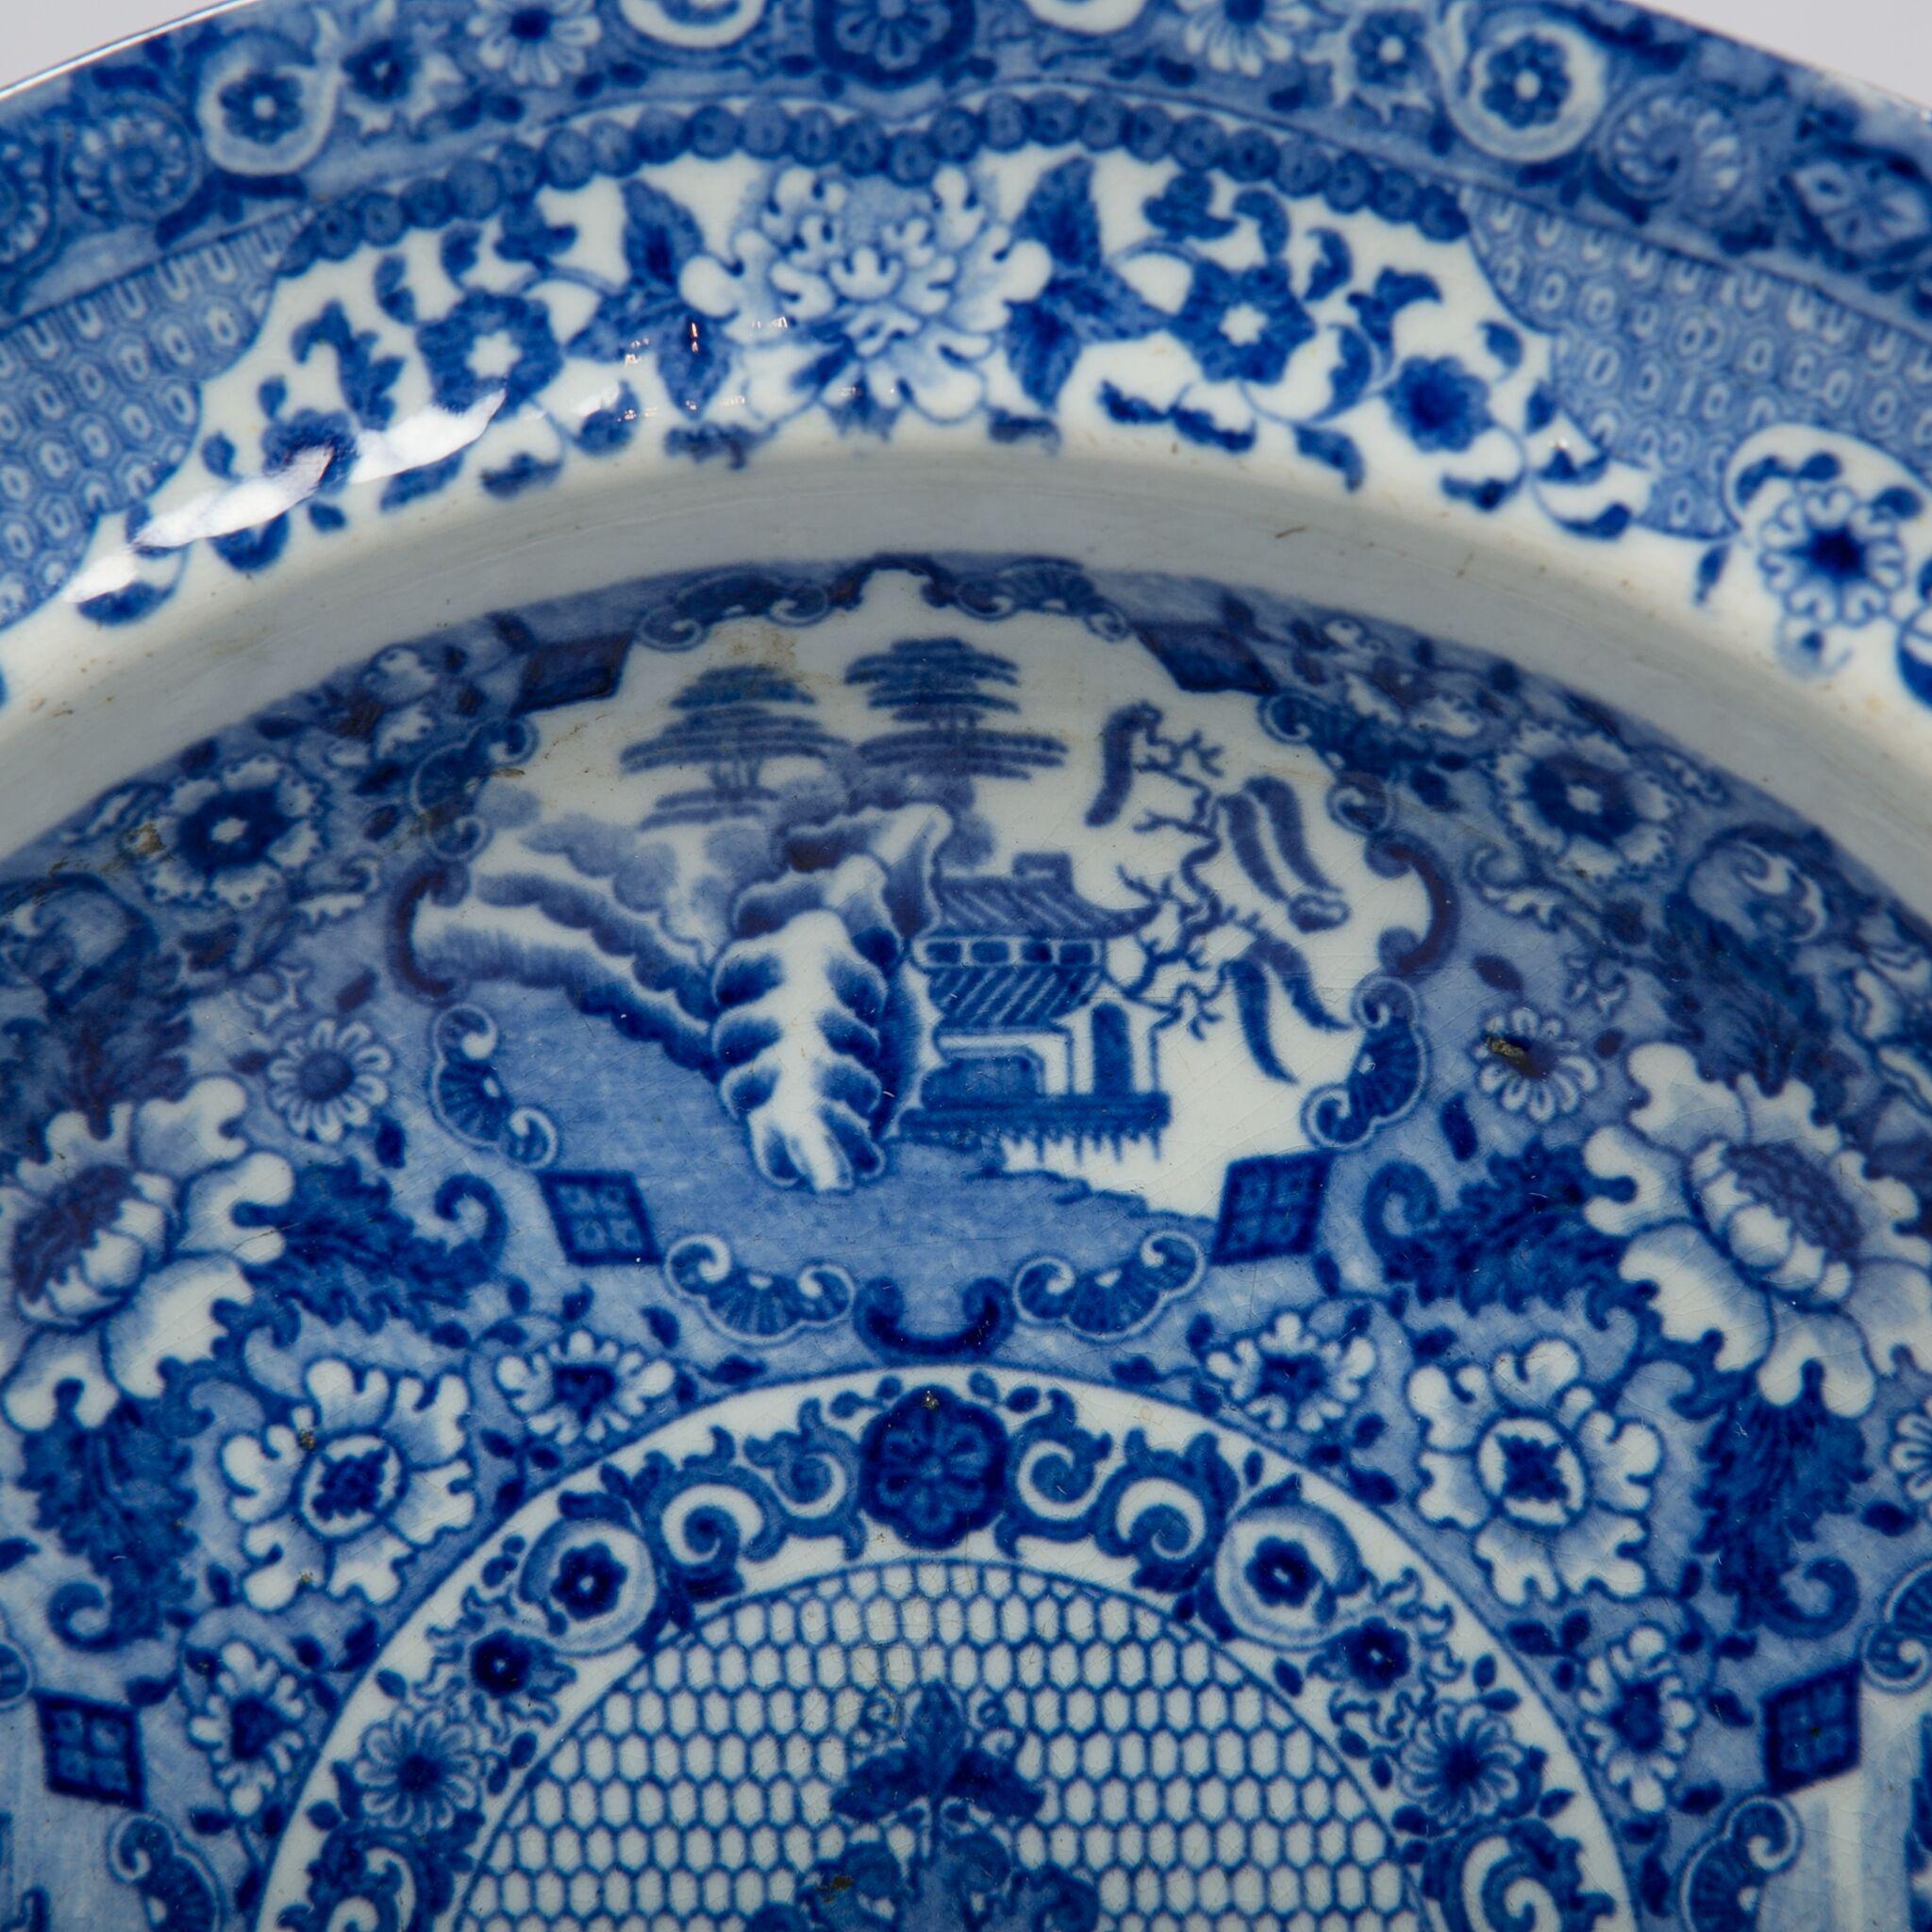 blue and white dishes from england